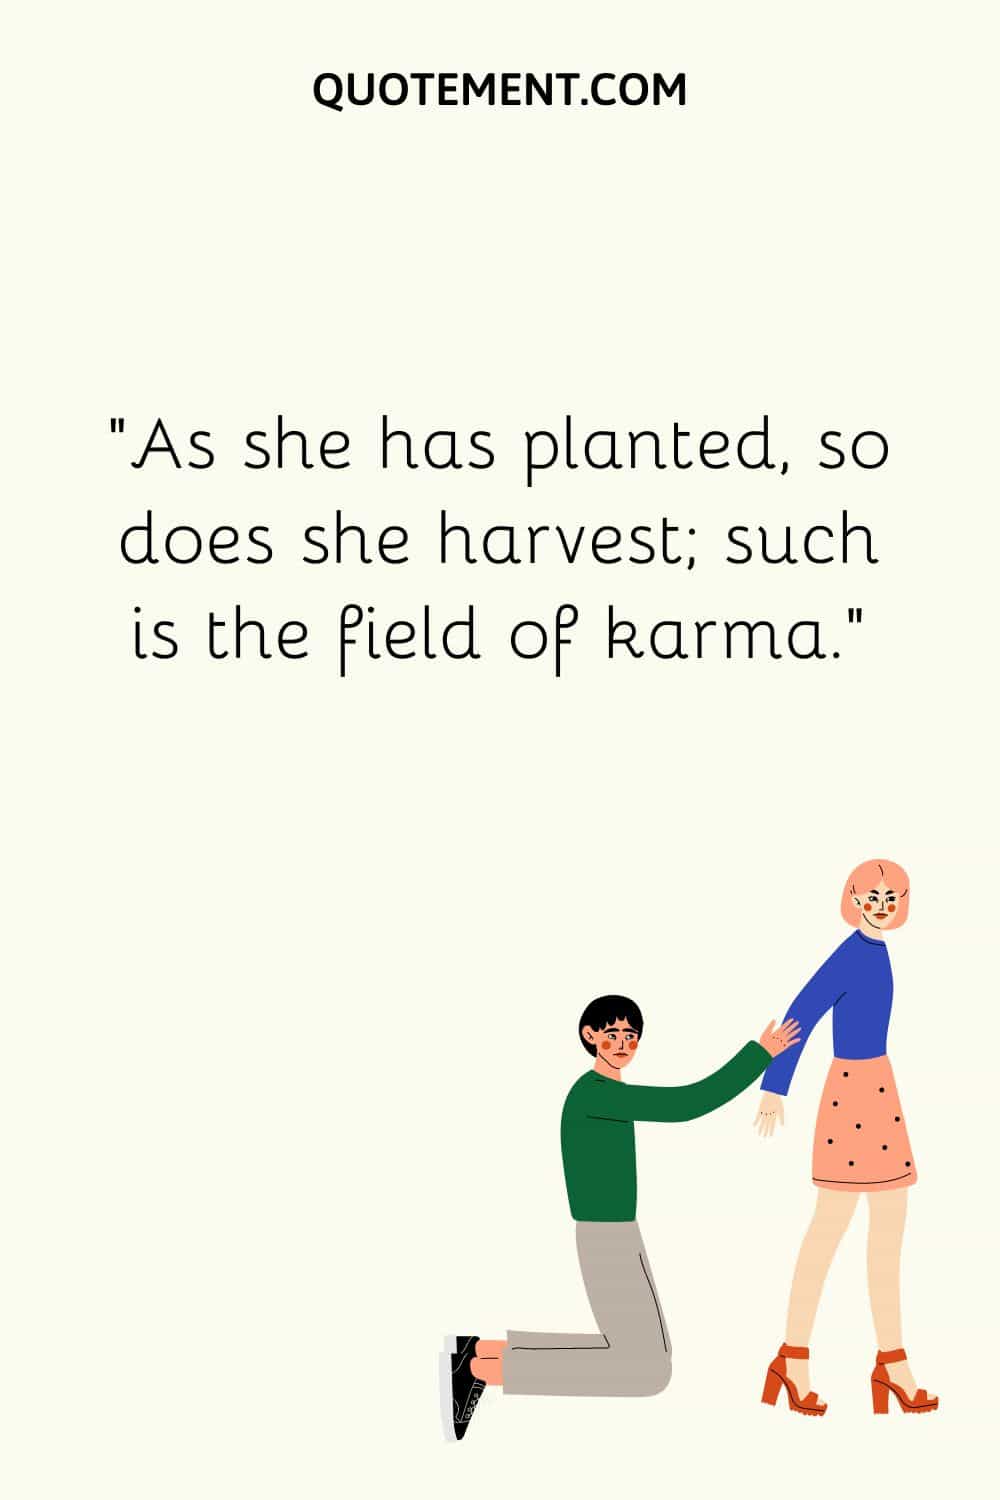 As she has planted, so does she harvest